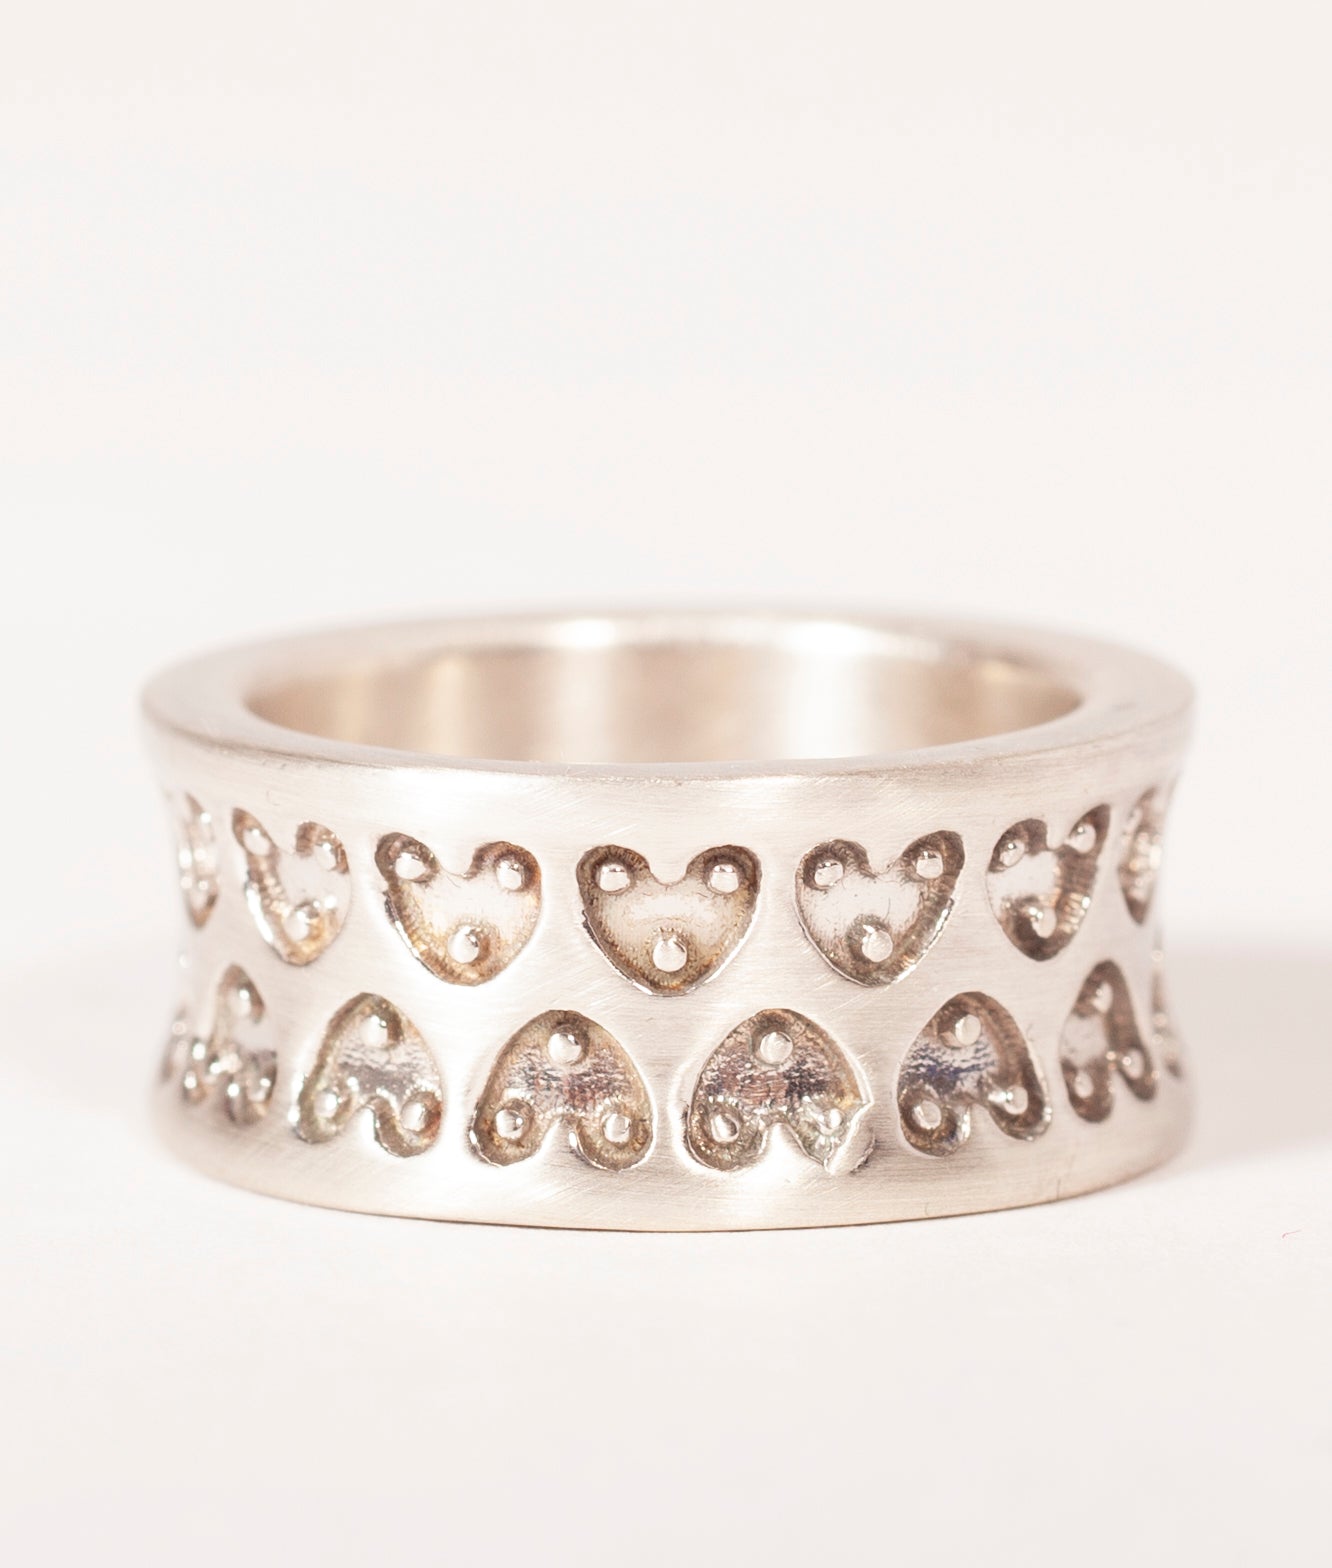 Inspired by an ancient Viking wedding ring, Heart ring is a beautiful and simple ring that can be worn every day. It can be made in any metal.